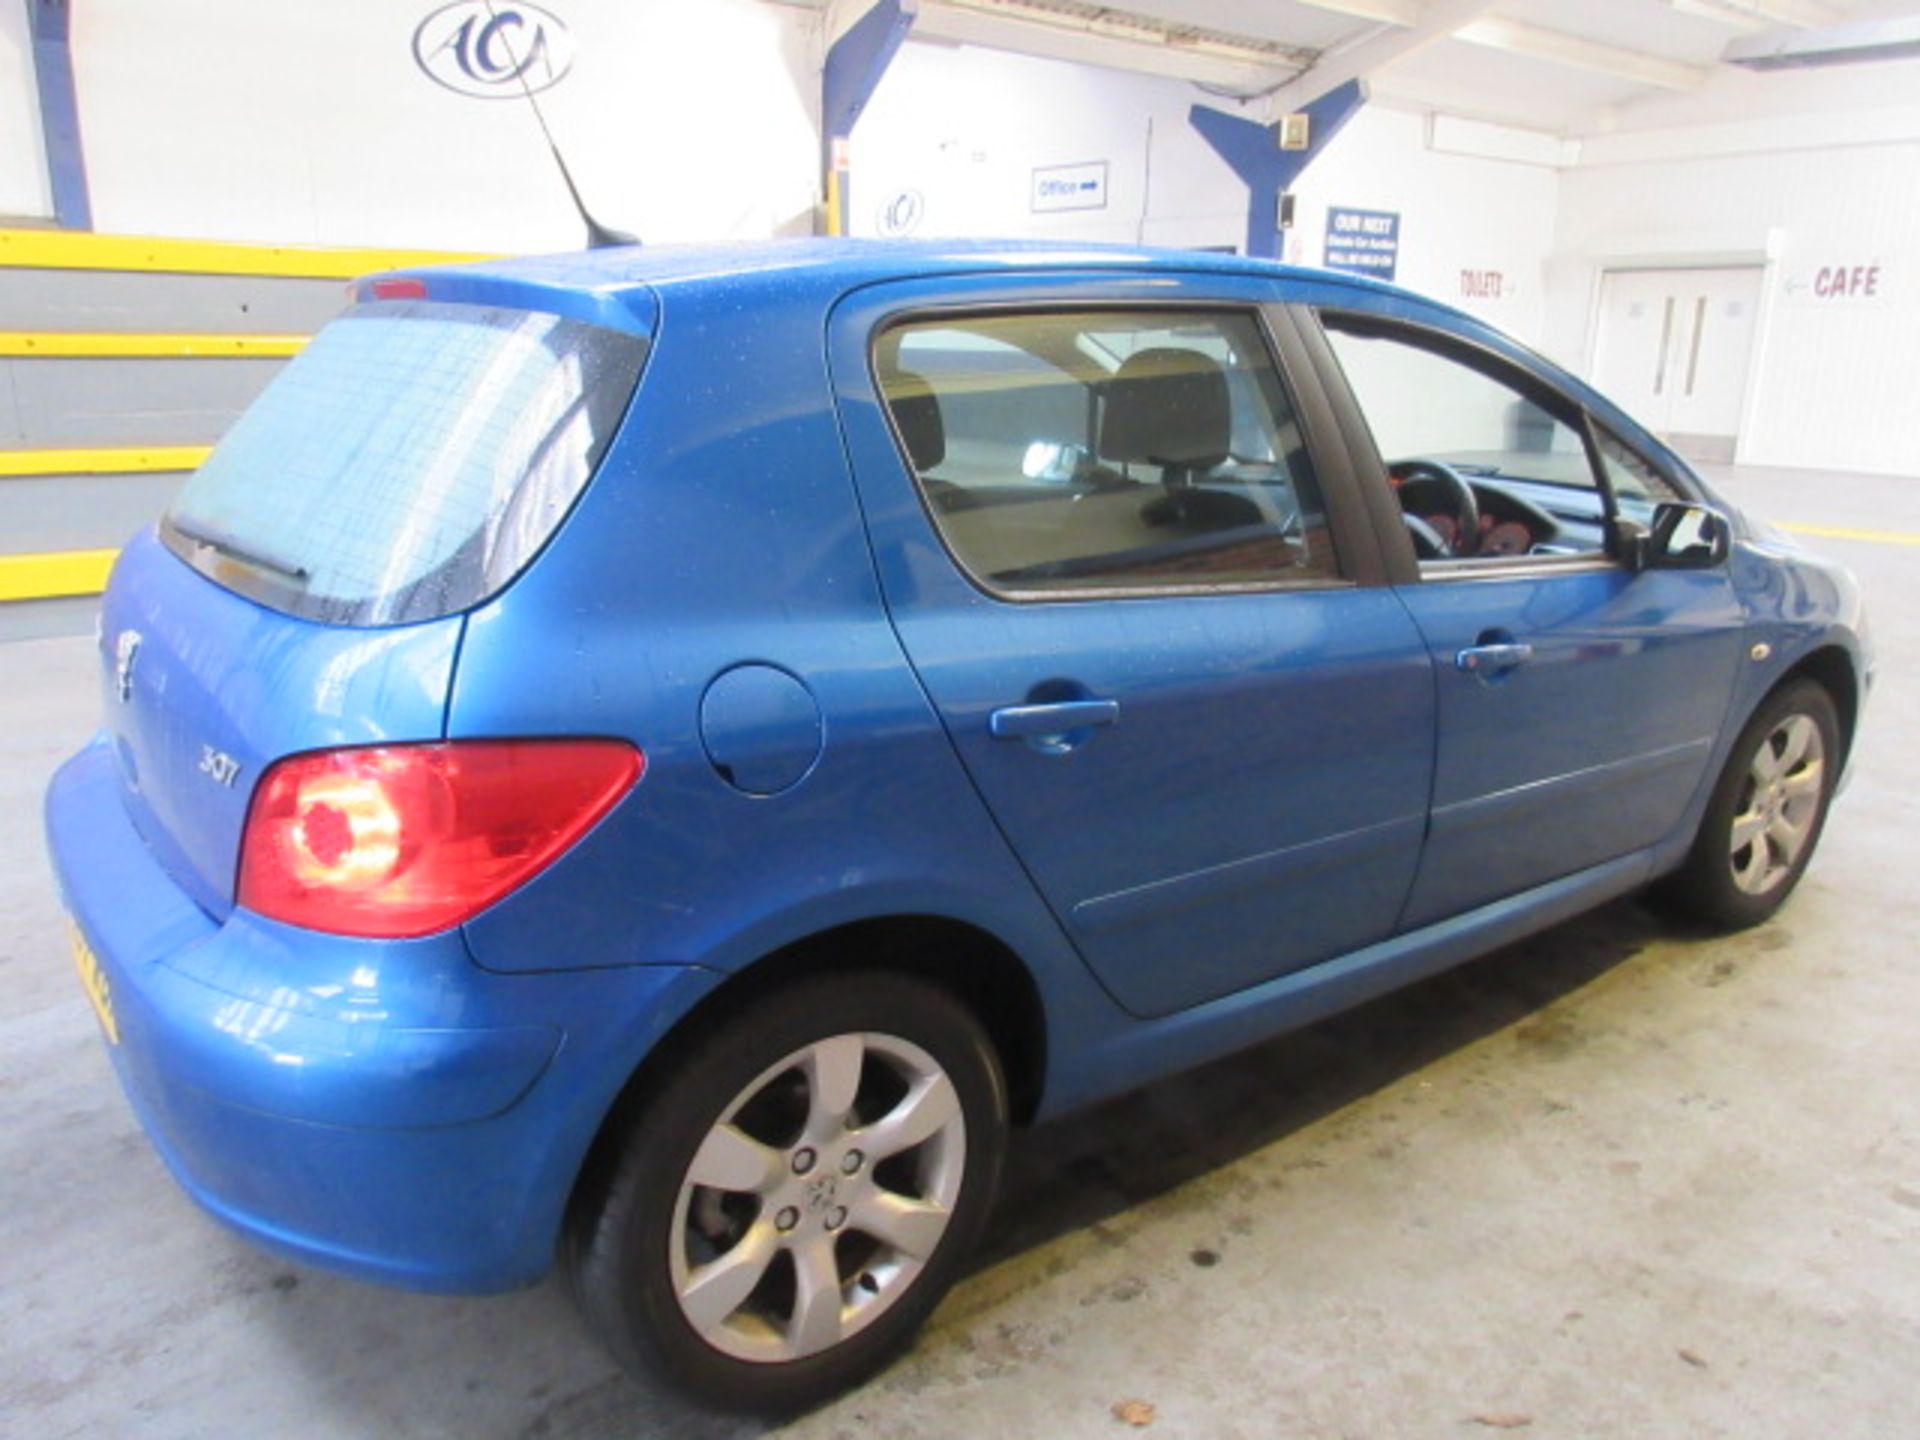 57 07 Peugeot 307 S - Image 3 of 17